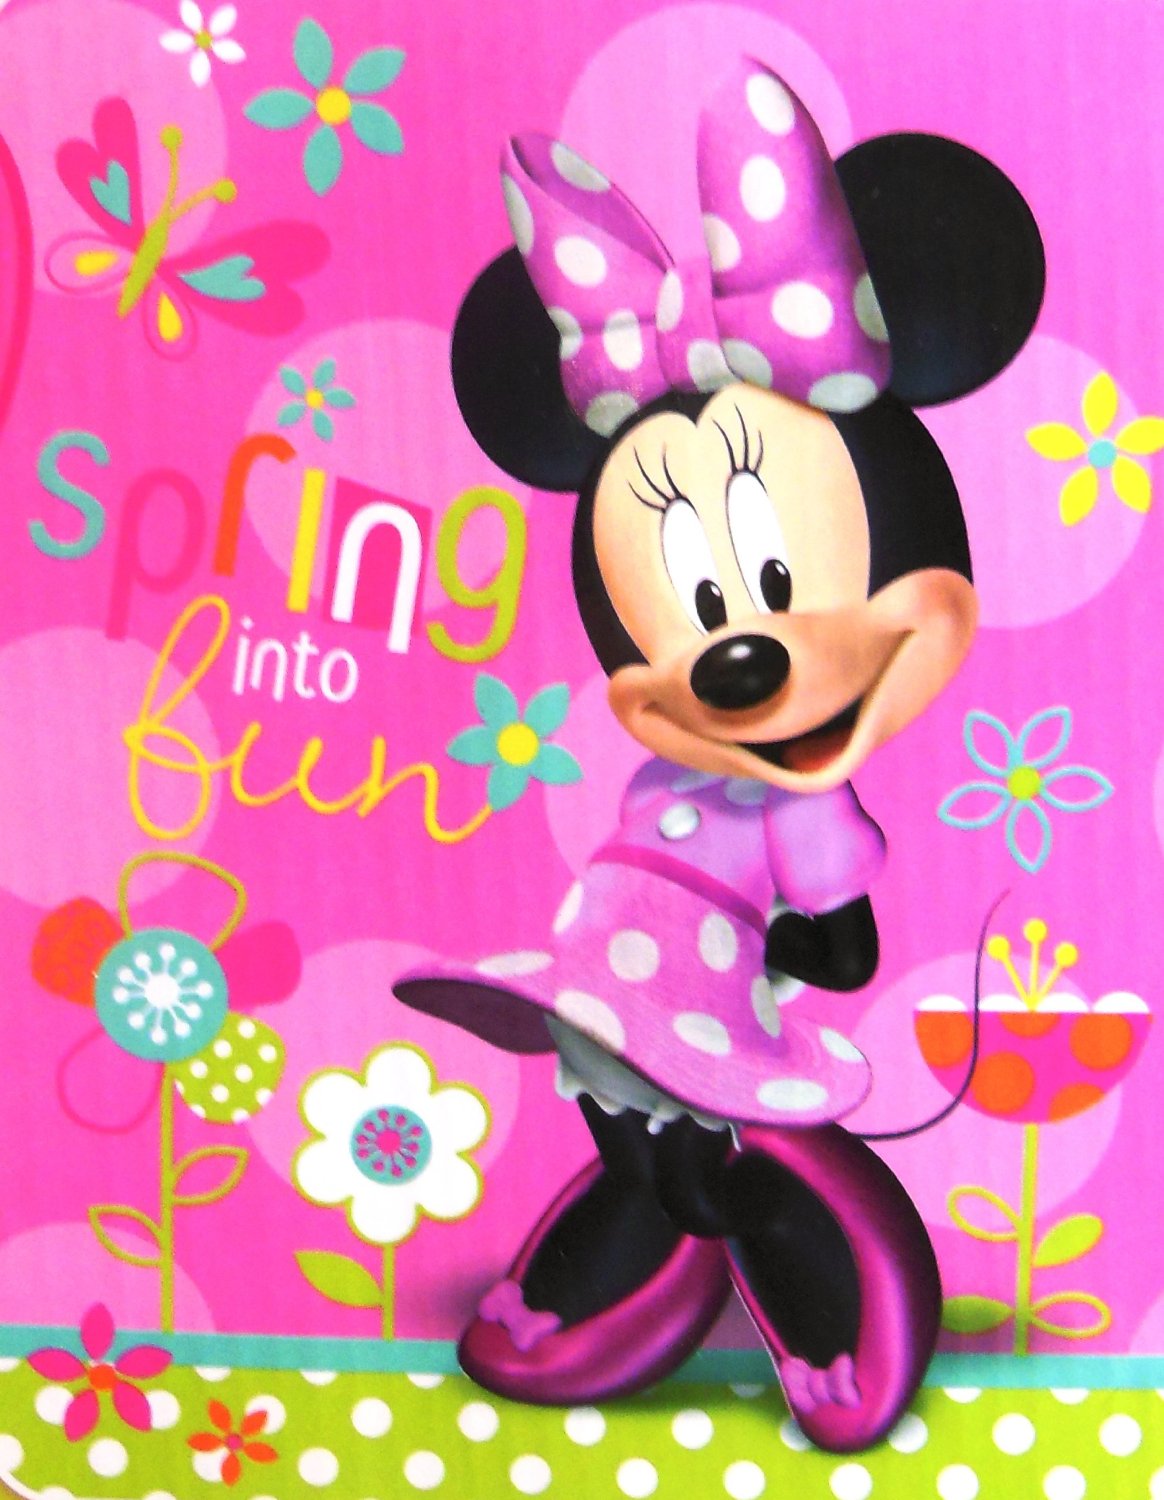 [48+] Minnie Mouse Wallpaper for iPhone on WallpaperSafari